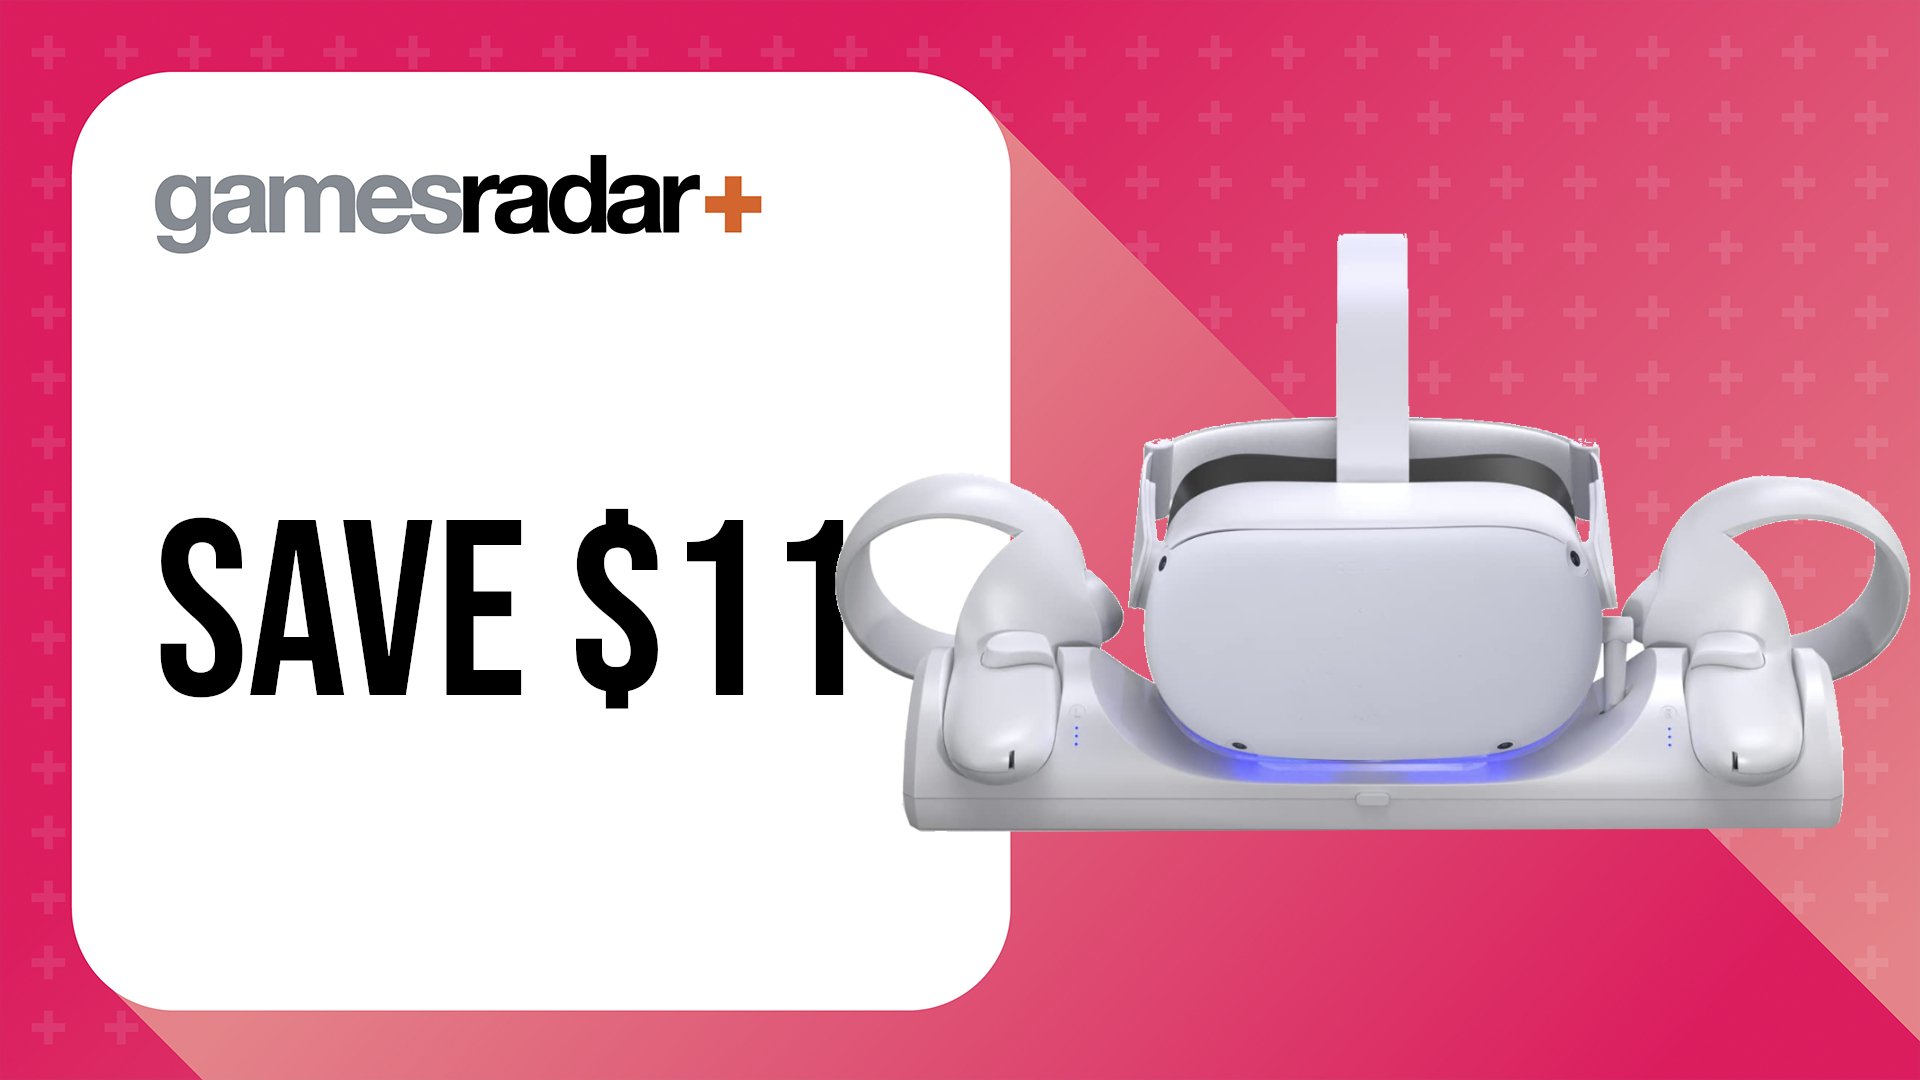 VR charging station for Quest 2 deal image with $11 saving stamp